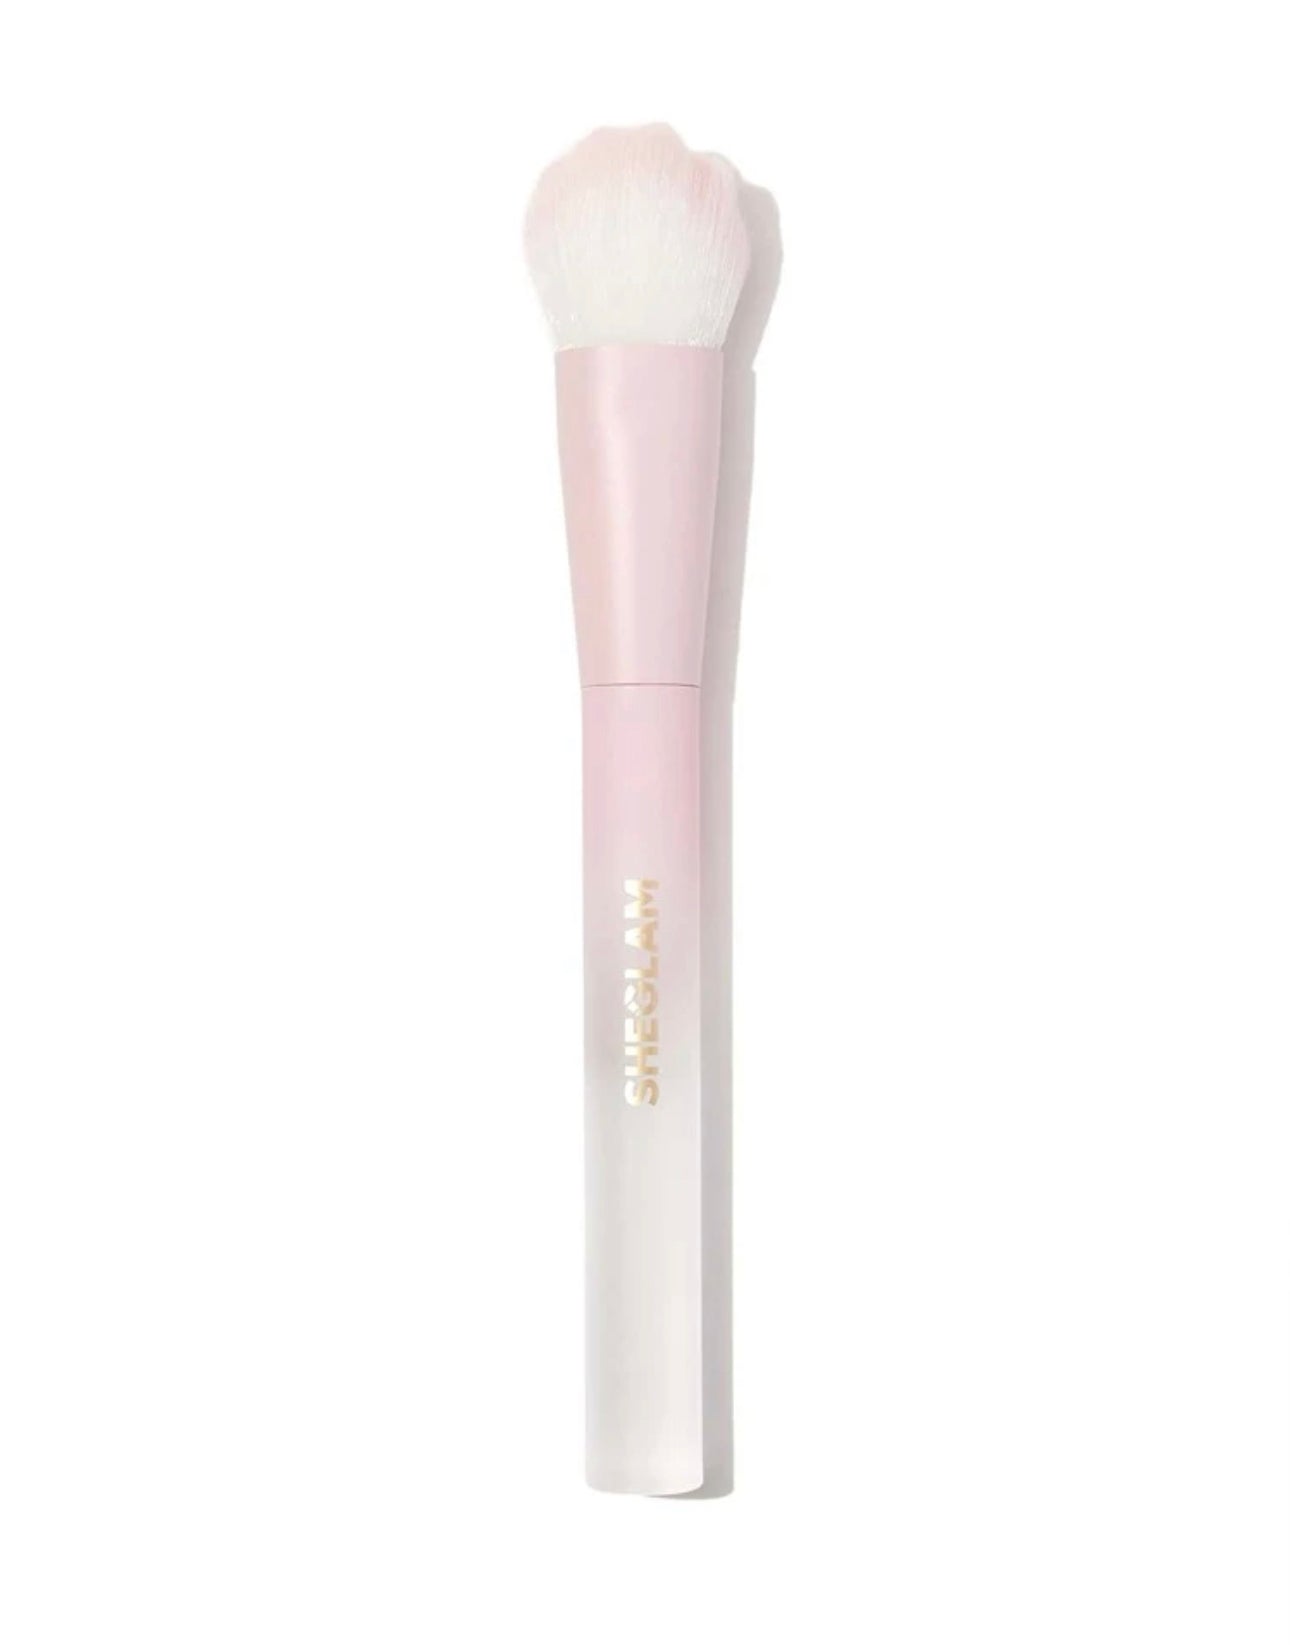 Color Bloom Liquid Blush Brush Synthetic Kitty Paw